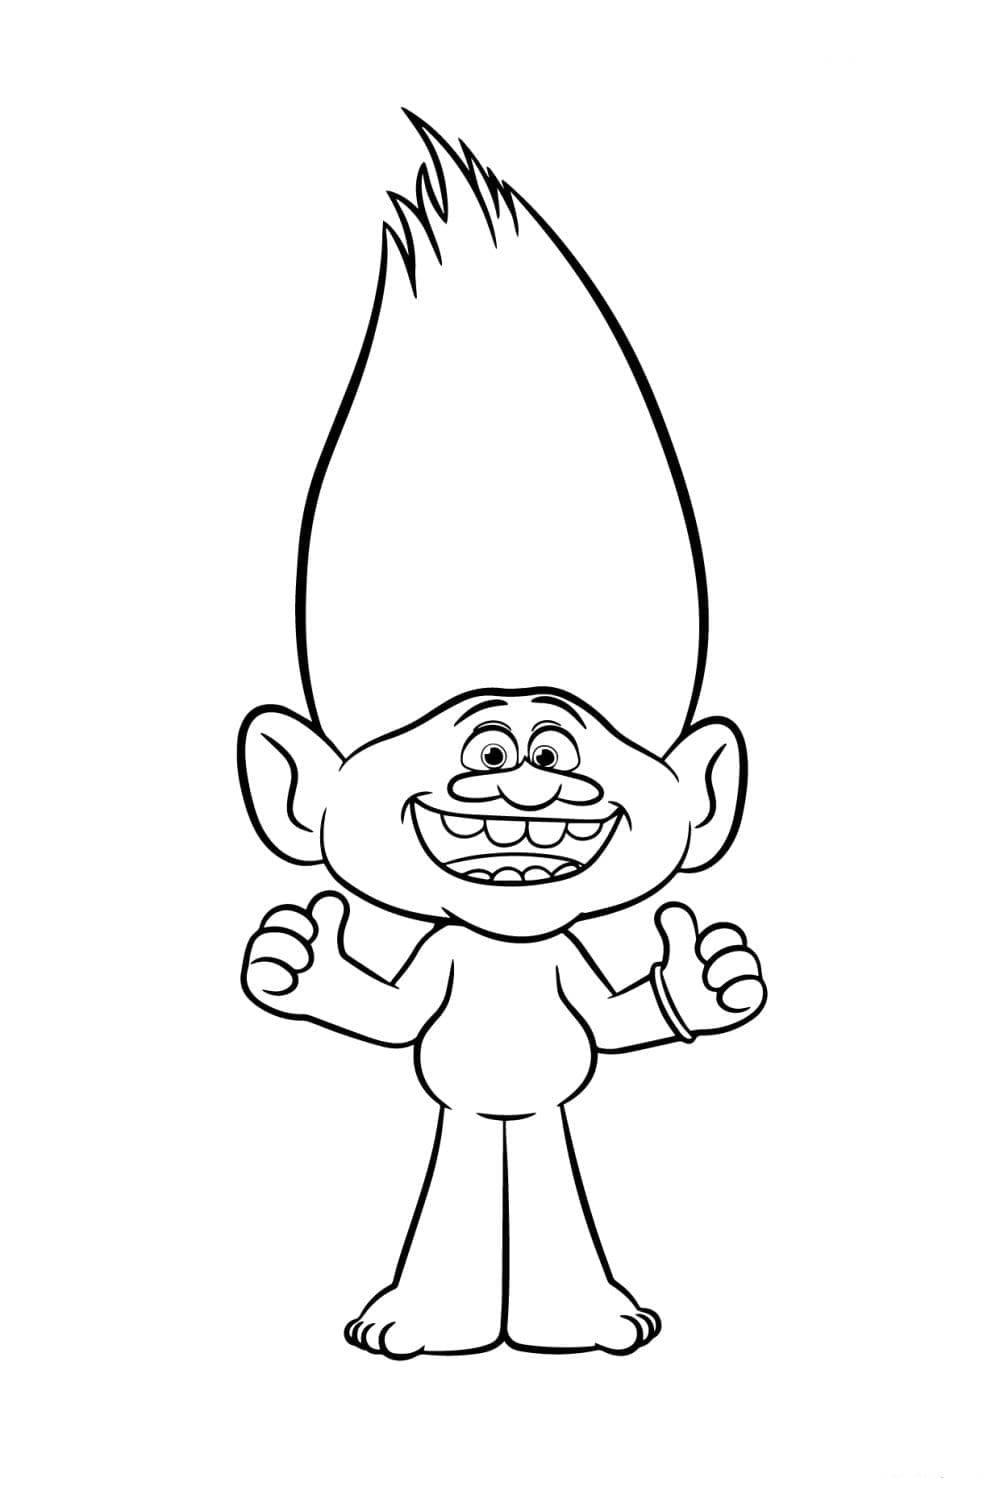 Guy diamond from trolls coloring page